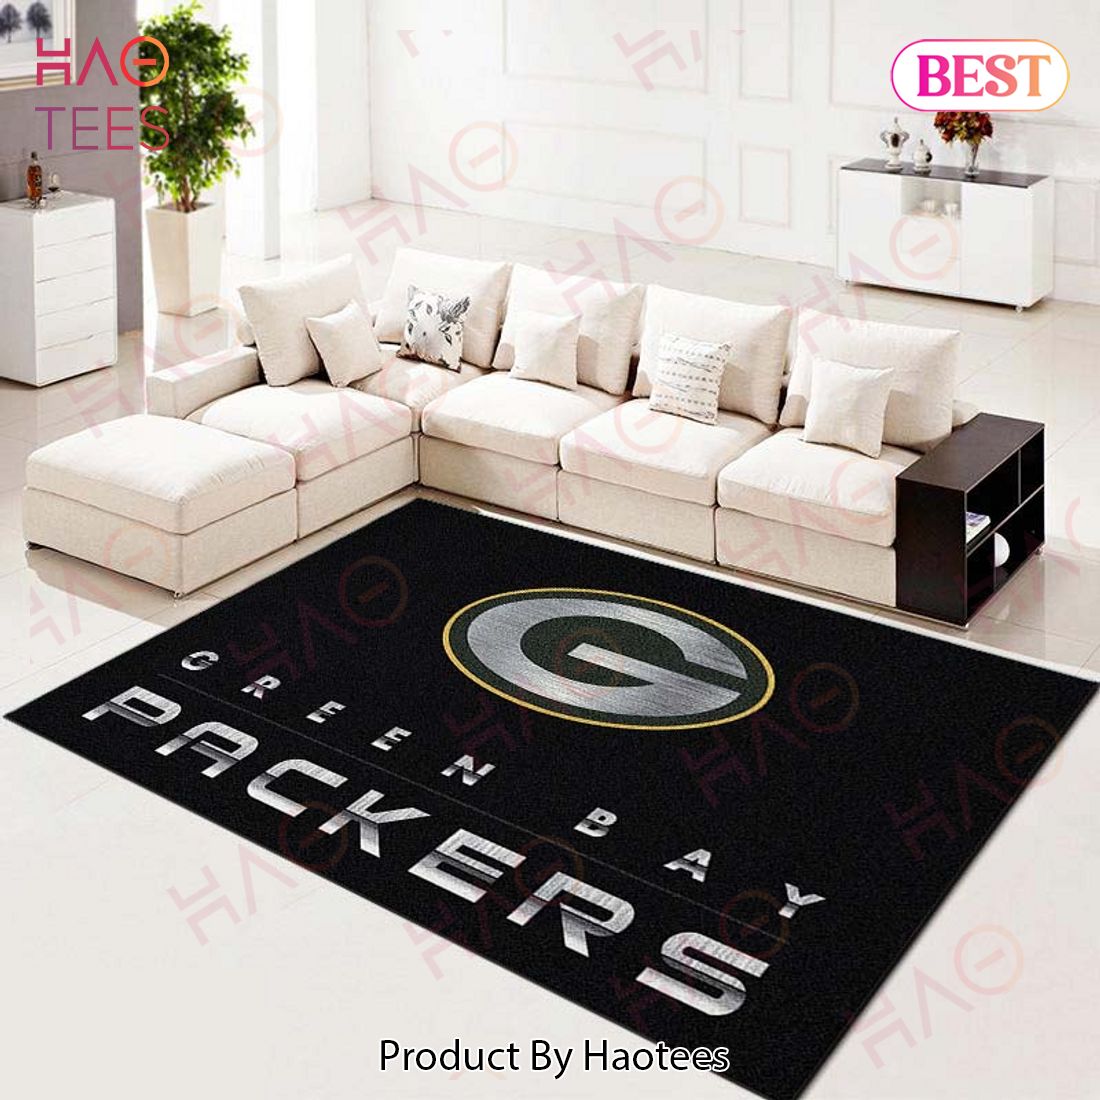 Green Bay Packers Football Team Nfl Chrome Living Room Carpet Kitchen Area Rugs